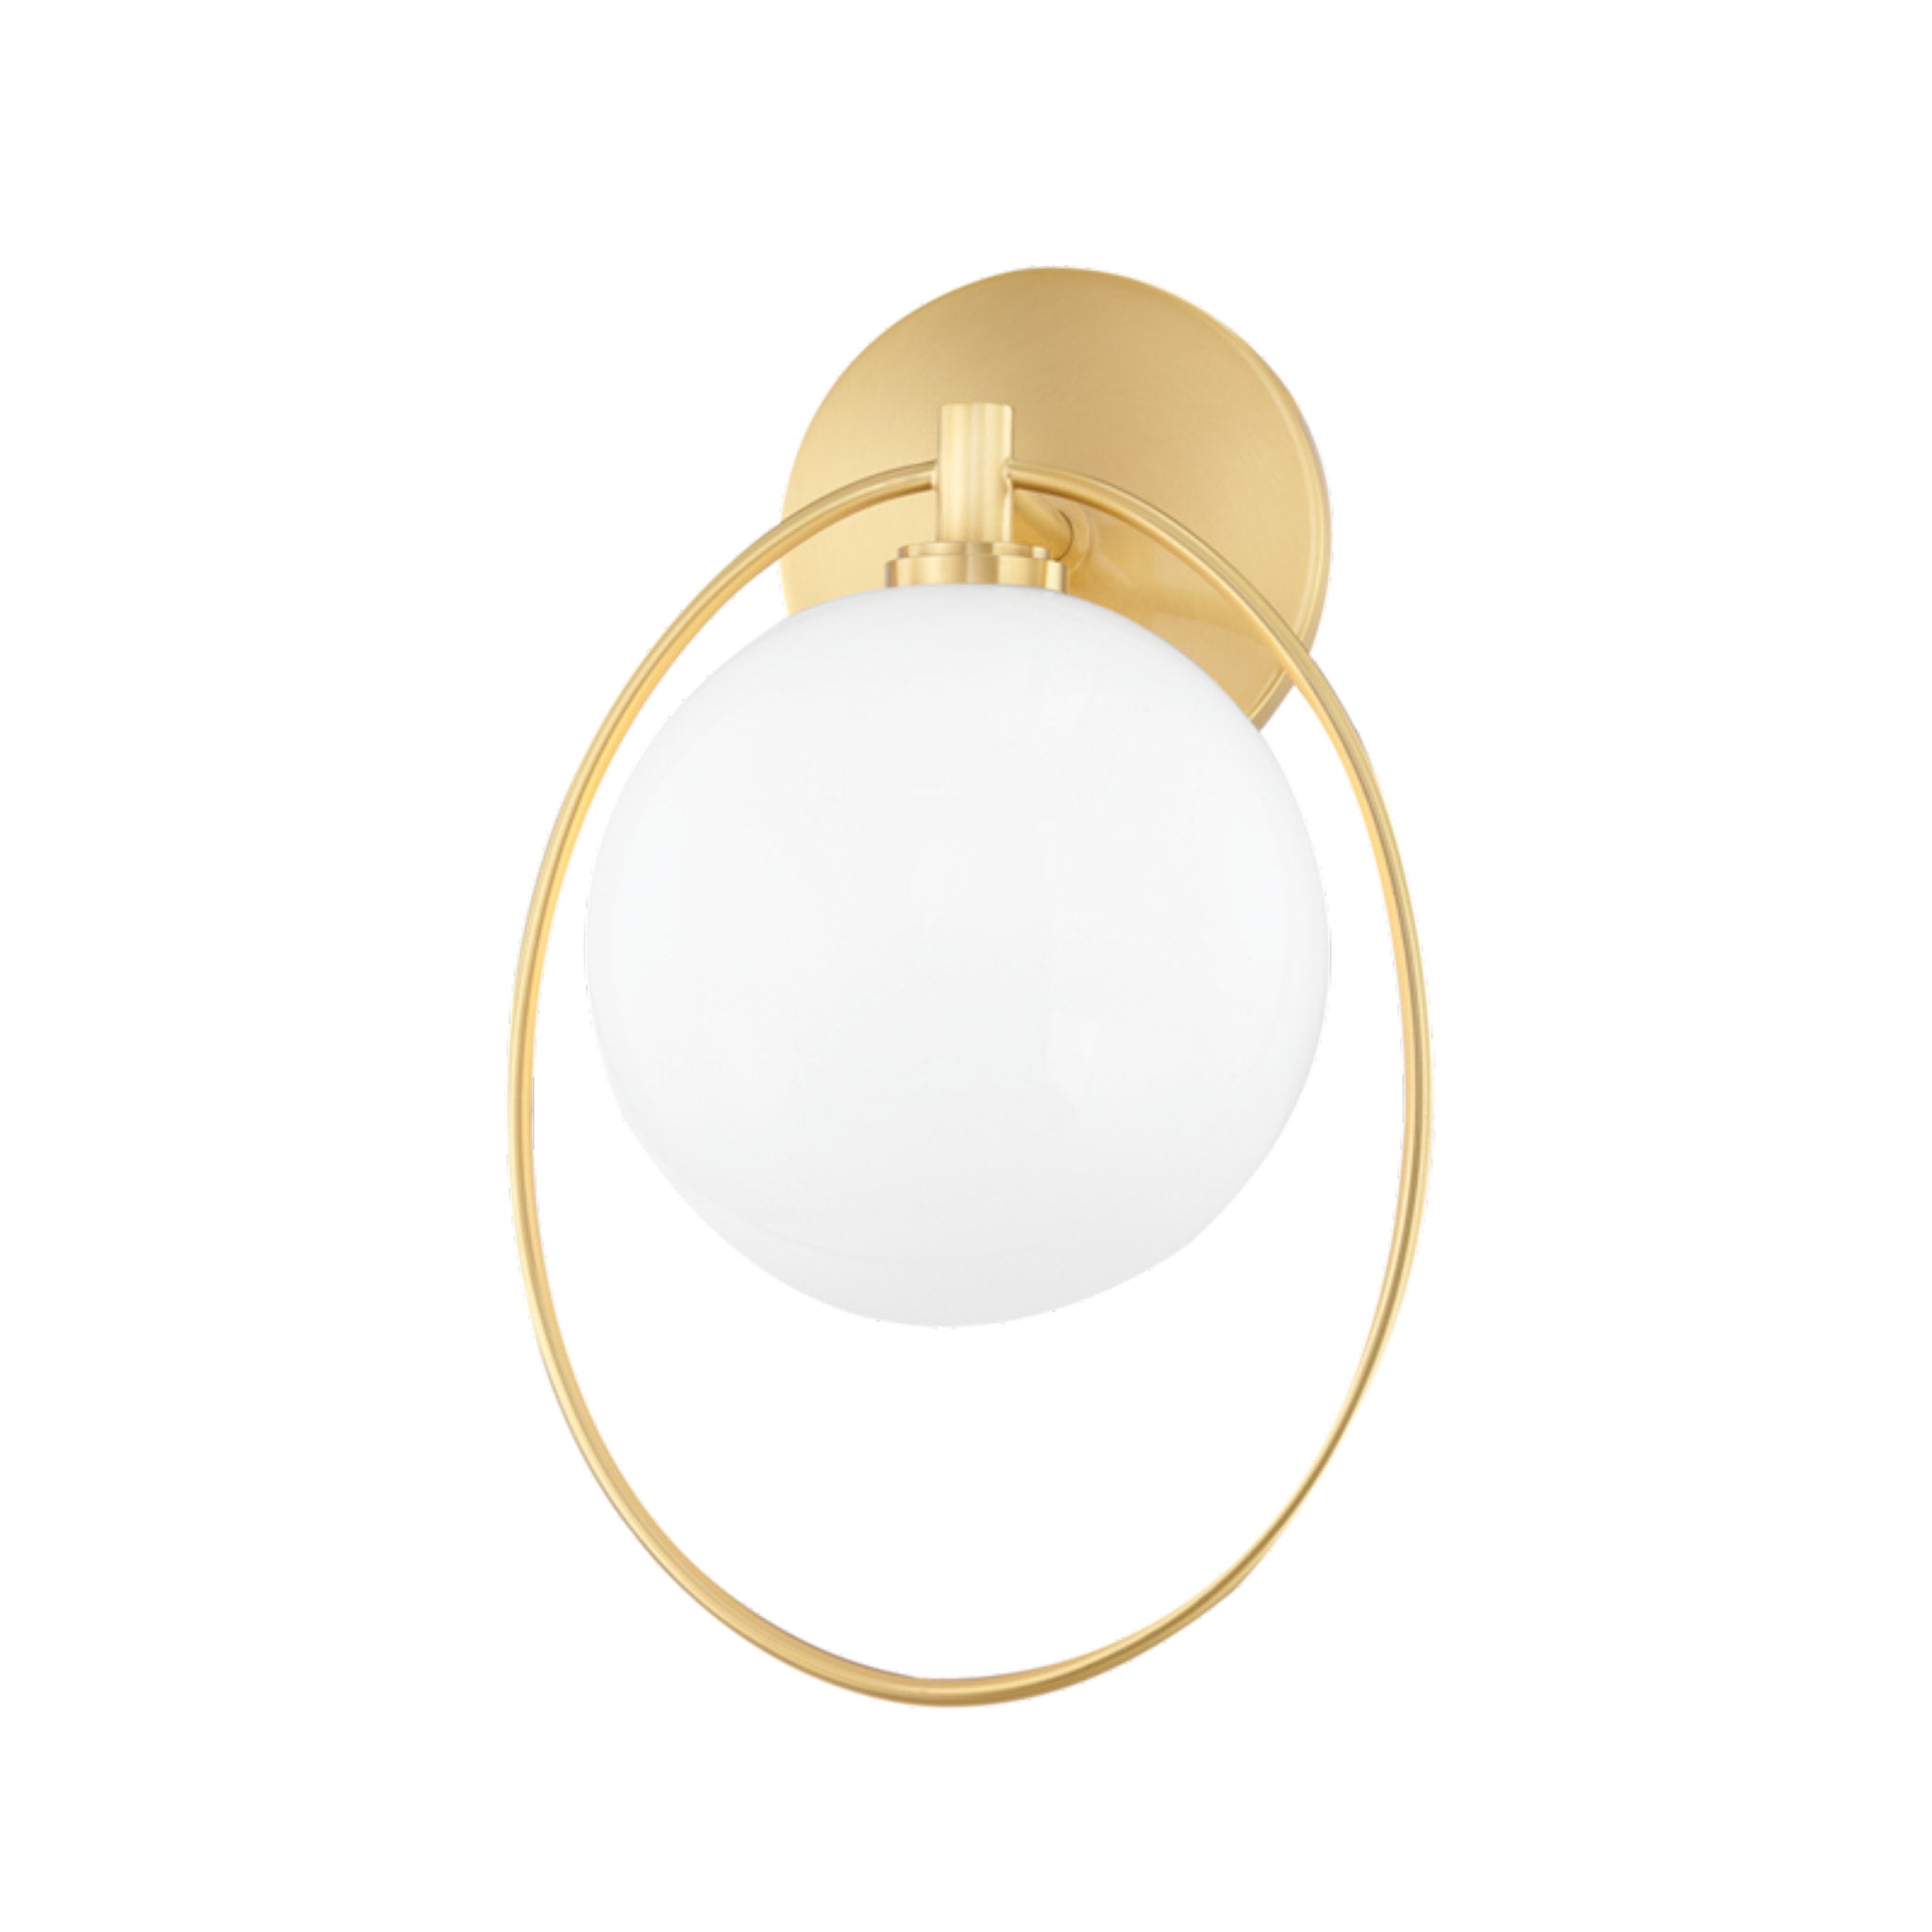 Babette 1 Light Wall Sconce in Aged Brass